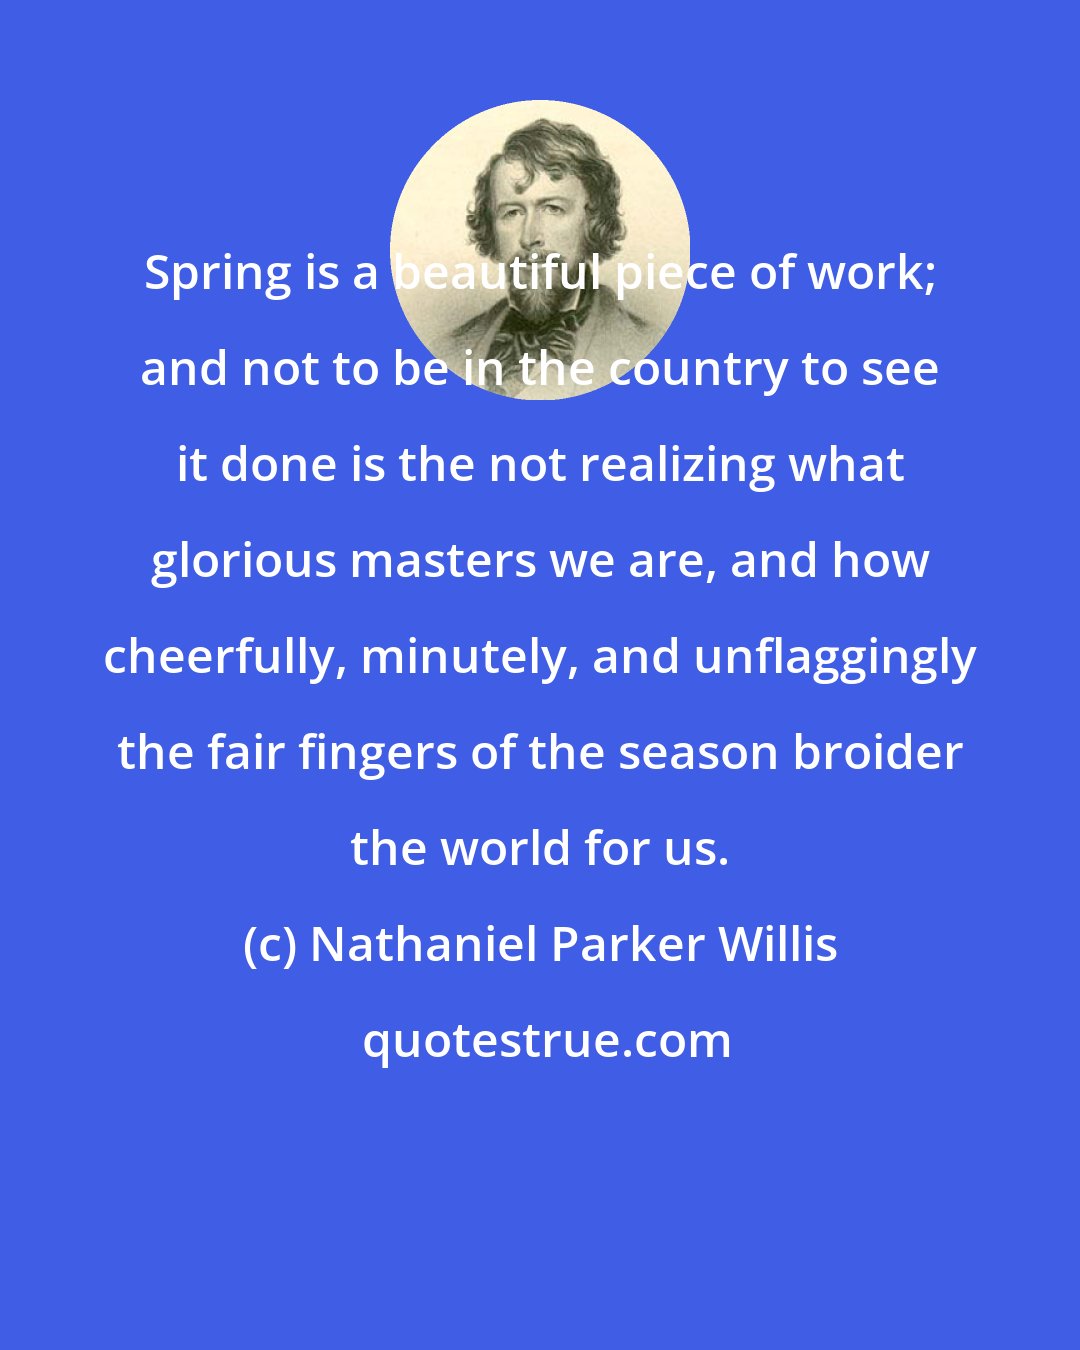 Nathaniel Parker Willis: Spring is a beautiful piece of work; and not to be in the country to see it done is the not realizing what glorious masters we are, and how cheerfully, minutely, and unflaggingly the fair fingers of the season broider the world for us.